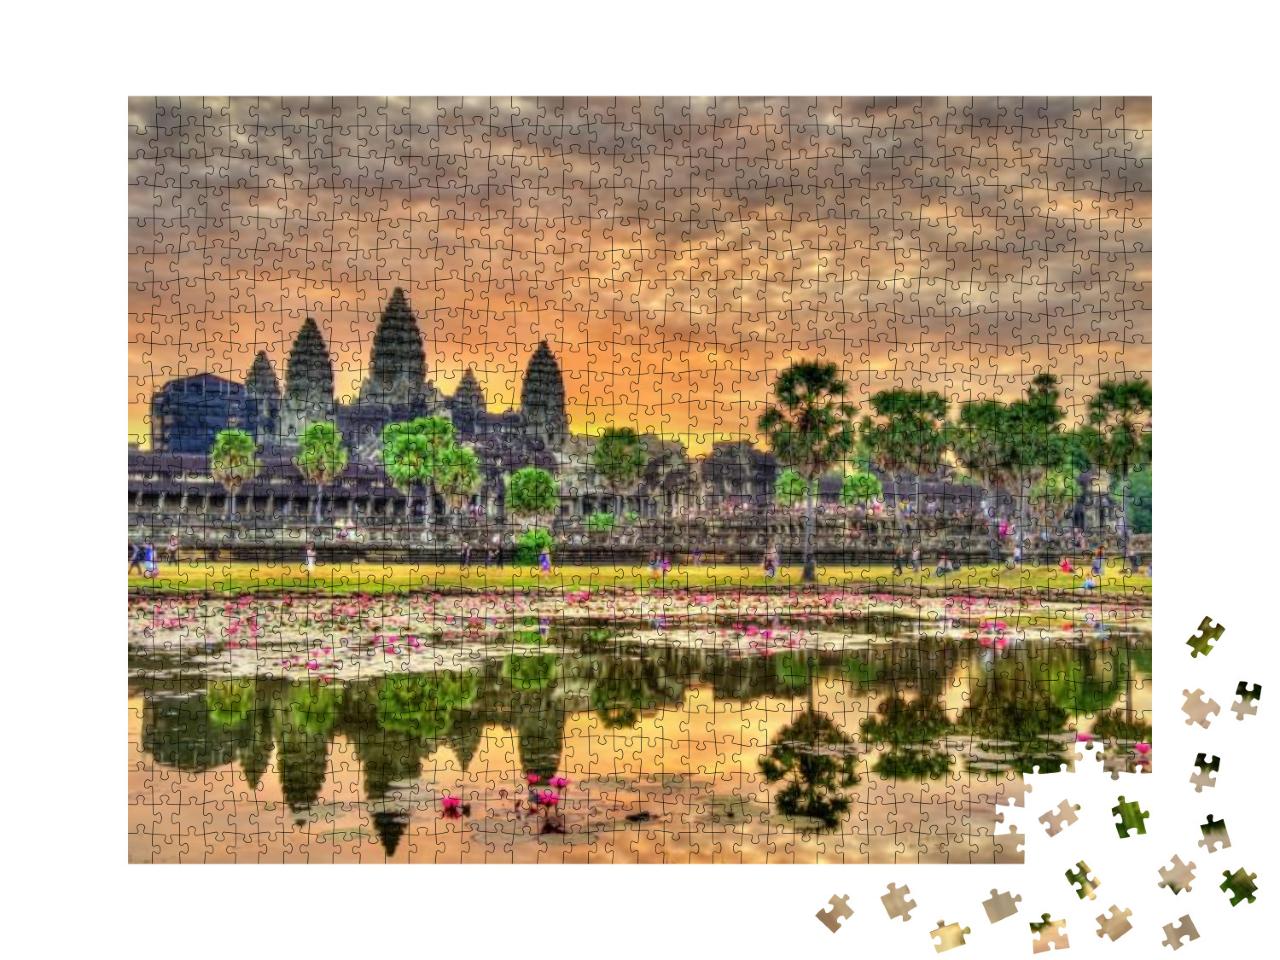 Sunrise At Angkor Wat, a UNESCO World Heritage Site in Ca... Jigsaw Puzzle with 1000 pieces